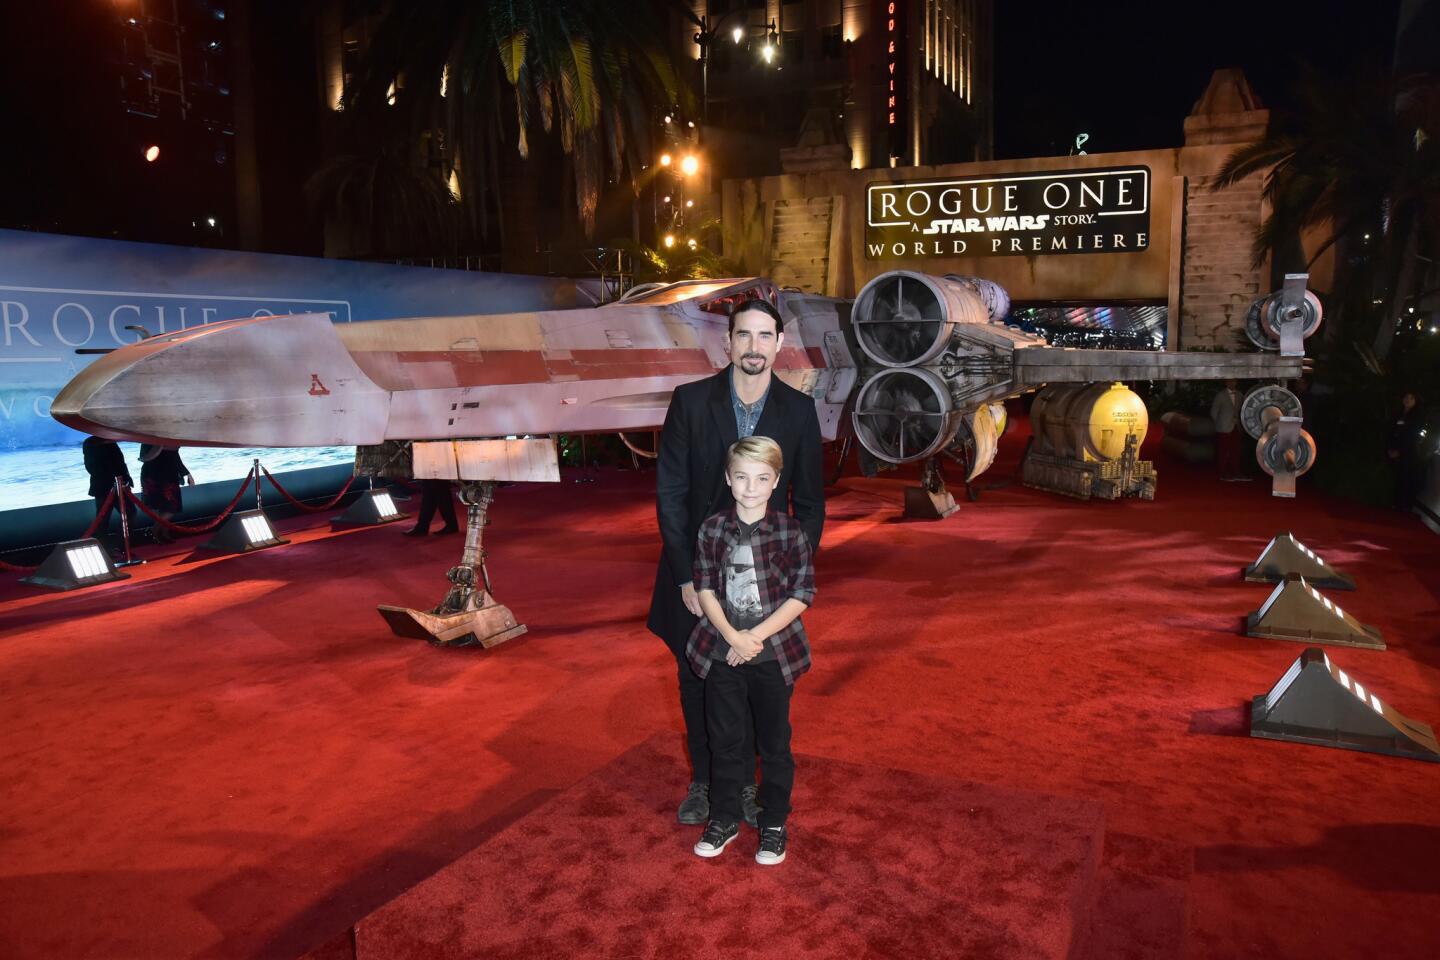 'Rogue One' premiere